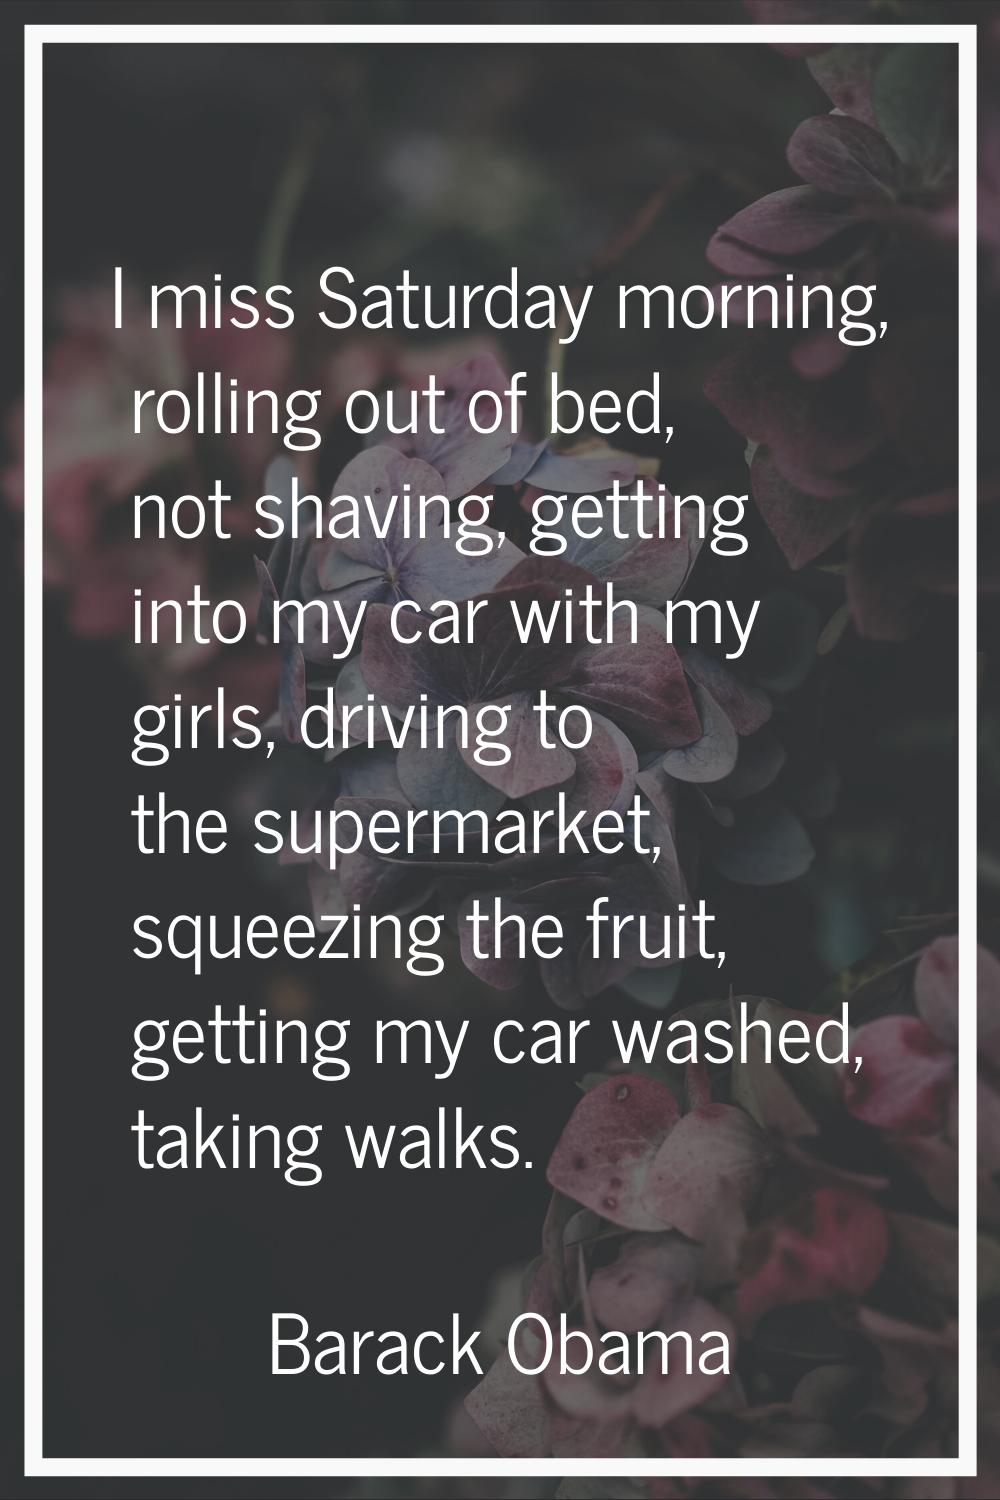 I miss Saturday morning, rolling out of bed, not shaving, getting into my car with my girls, drivin